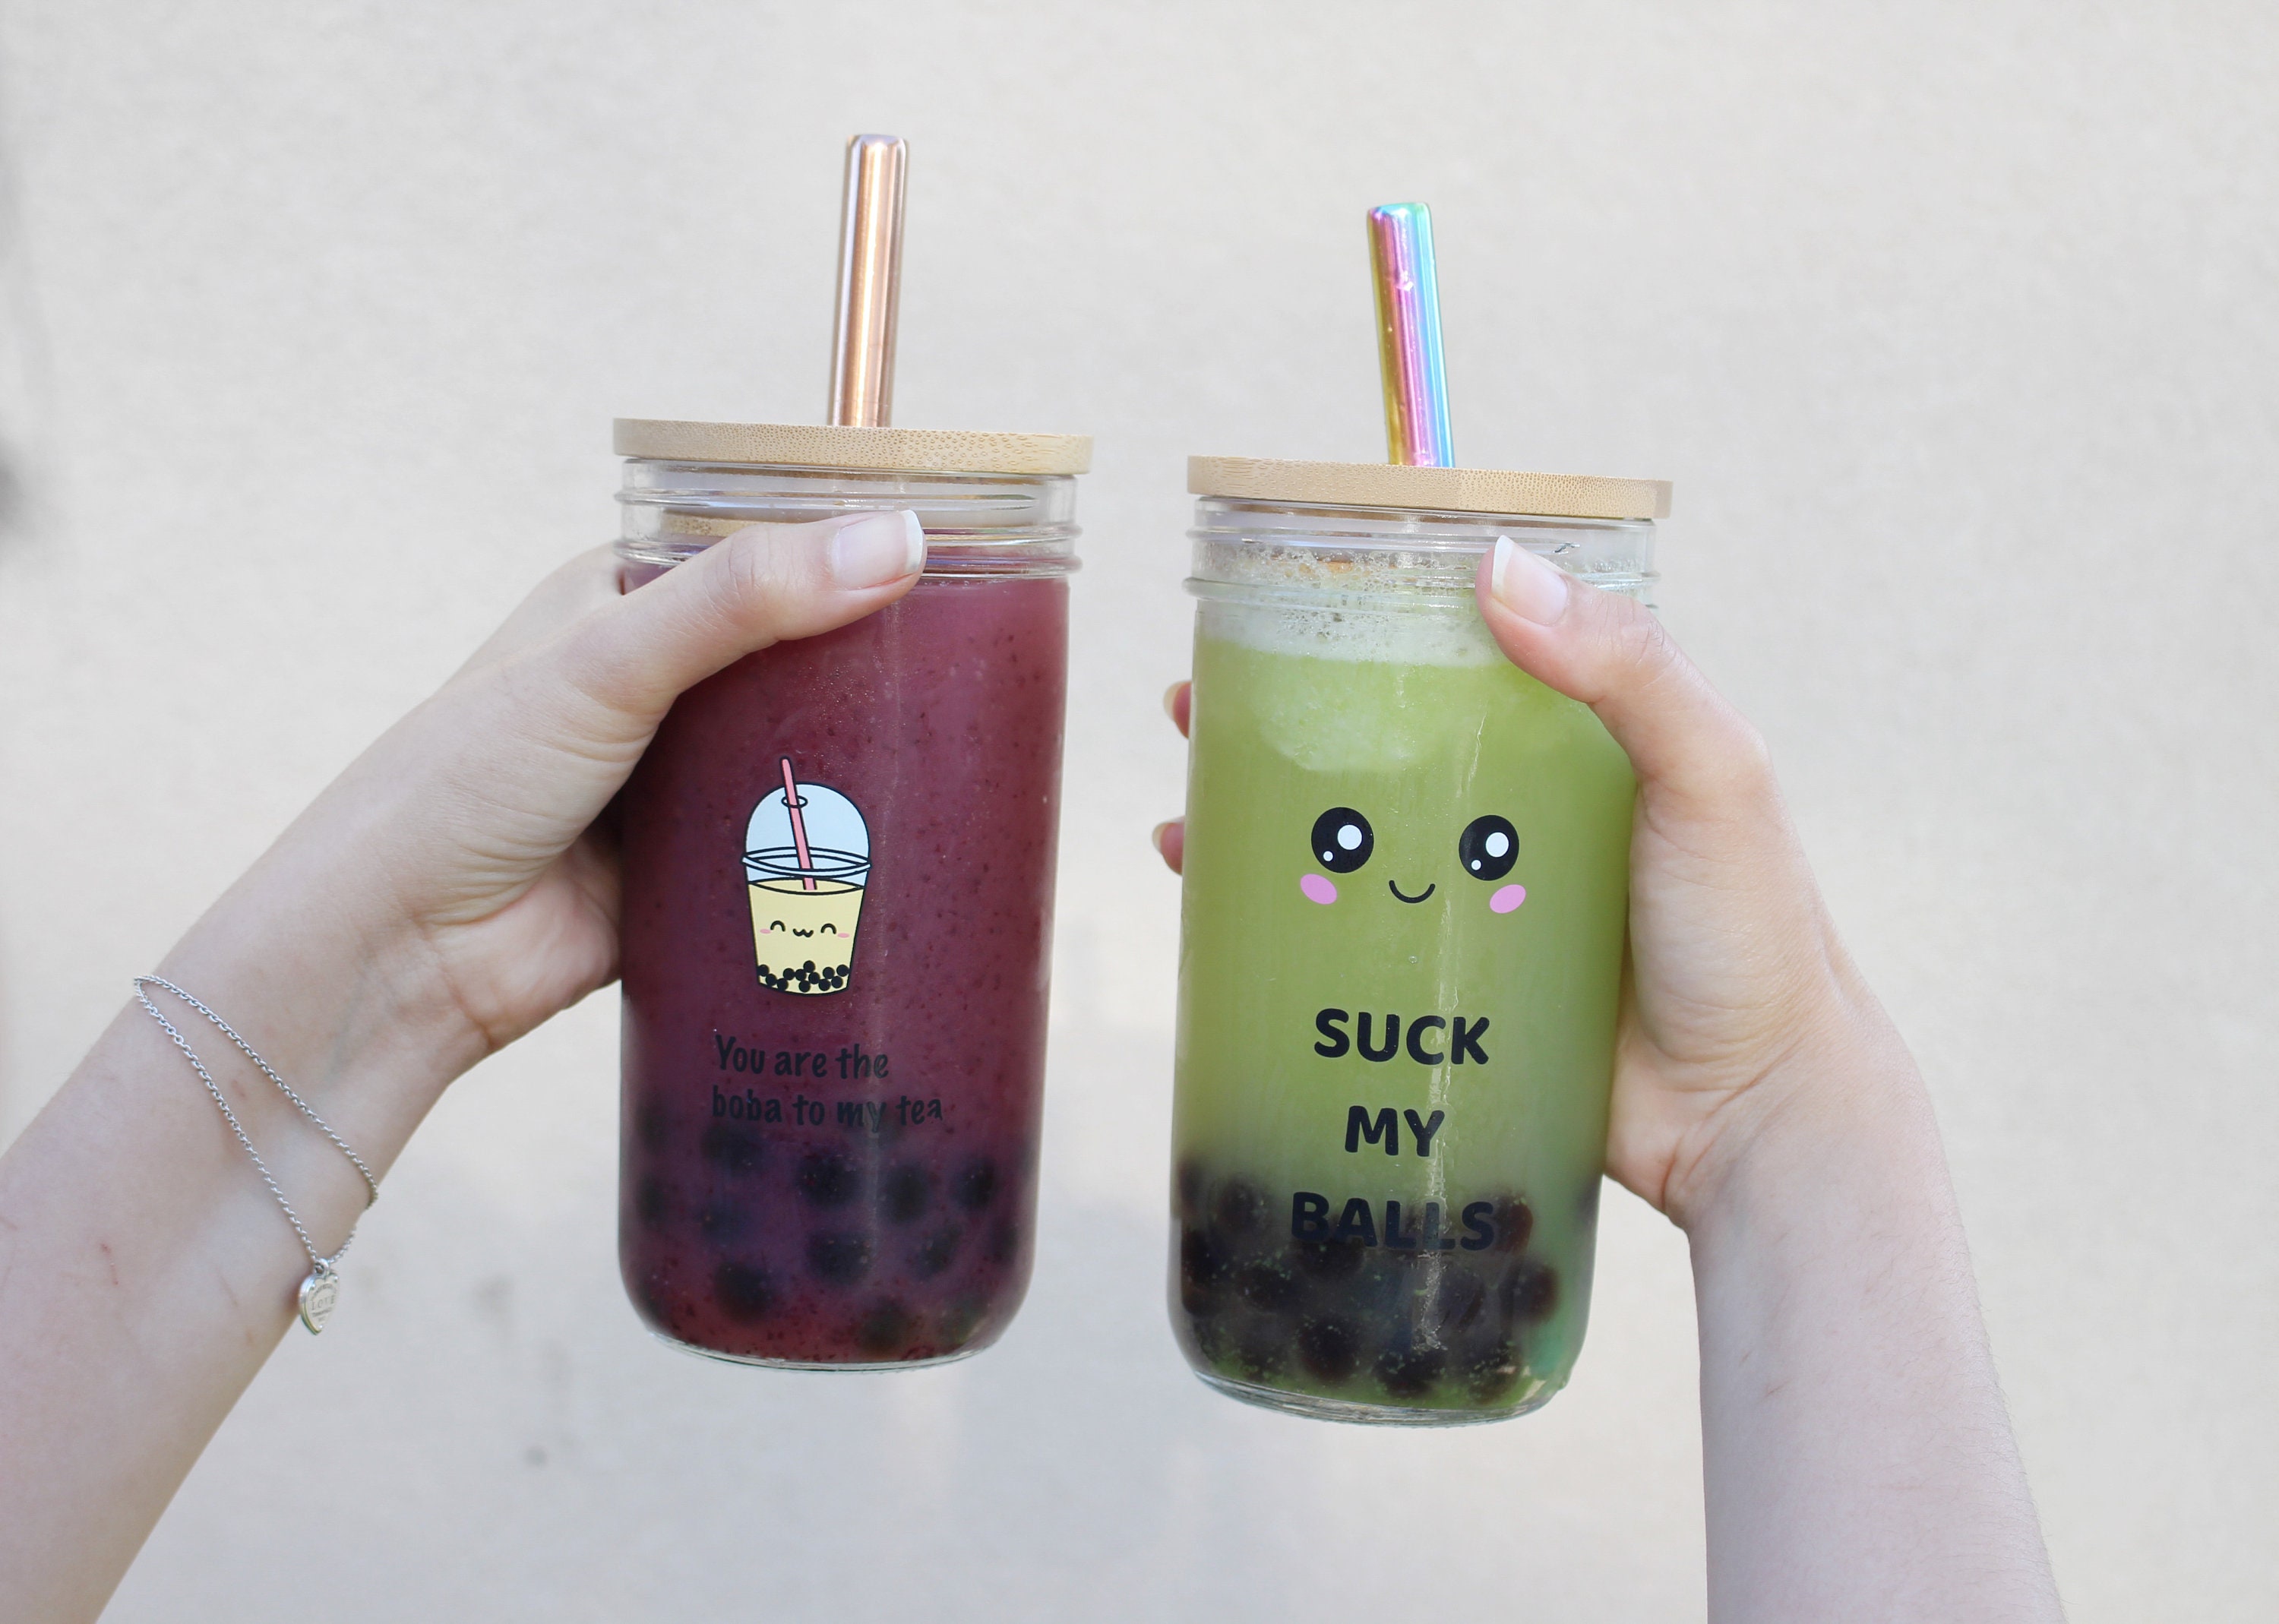 Reusable Bubble Tea Cup With Bevel Cut Stainless Steel Straw/ Eco-friendly Boba  Tea Cup / Reusable Smoothie Tumbler / Cute Reusable Boba Cup 